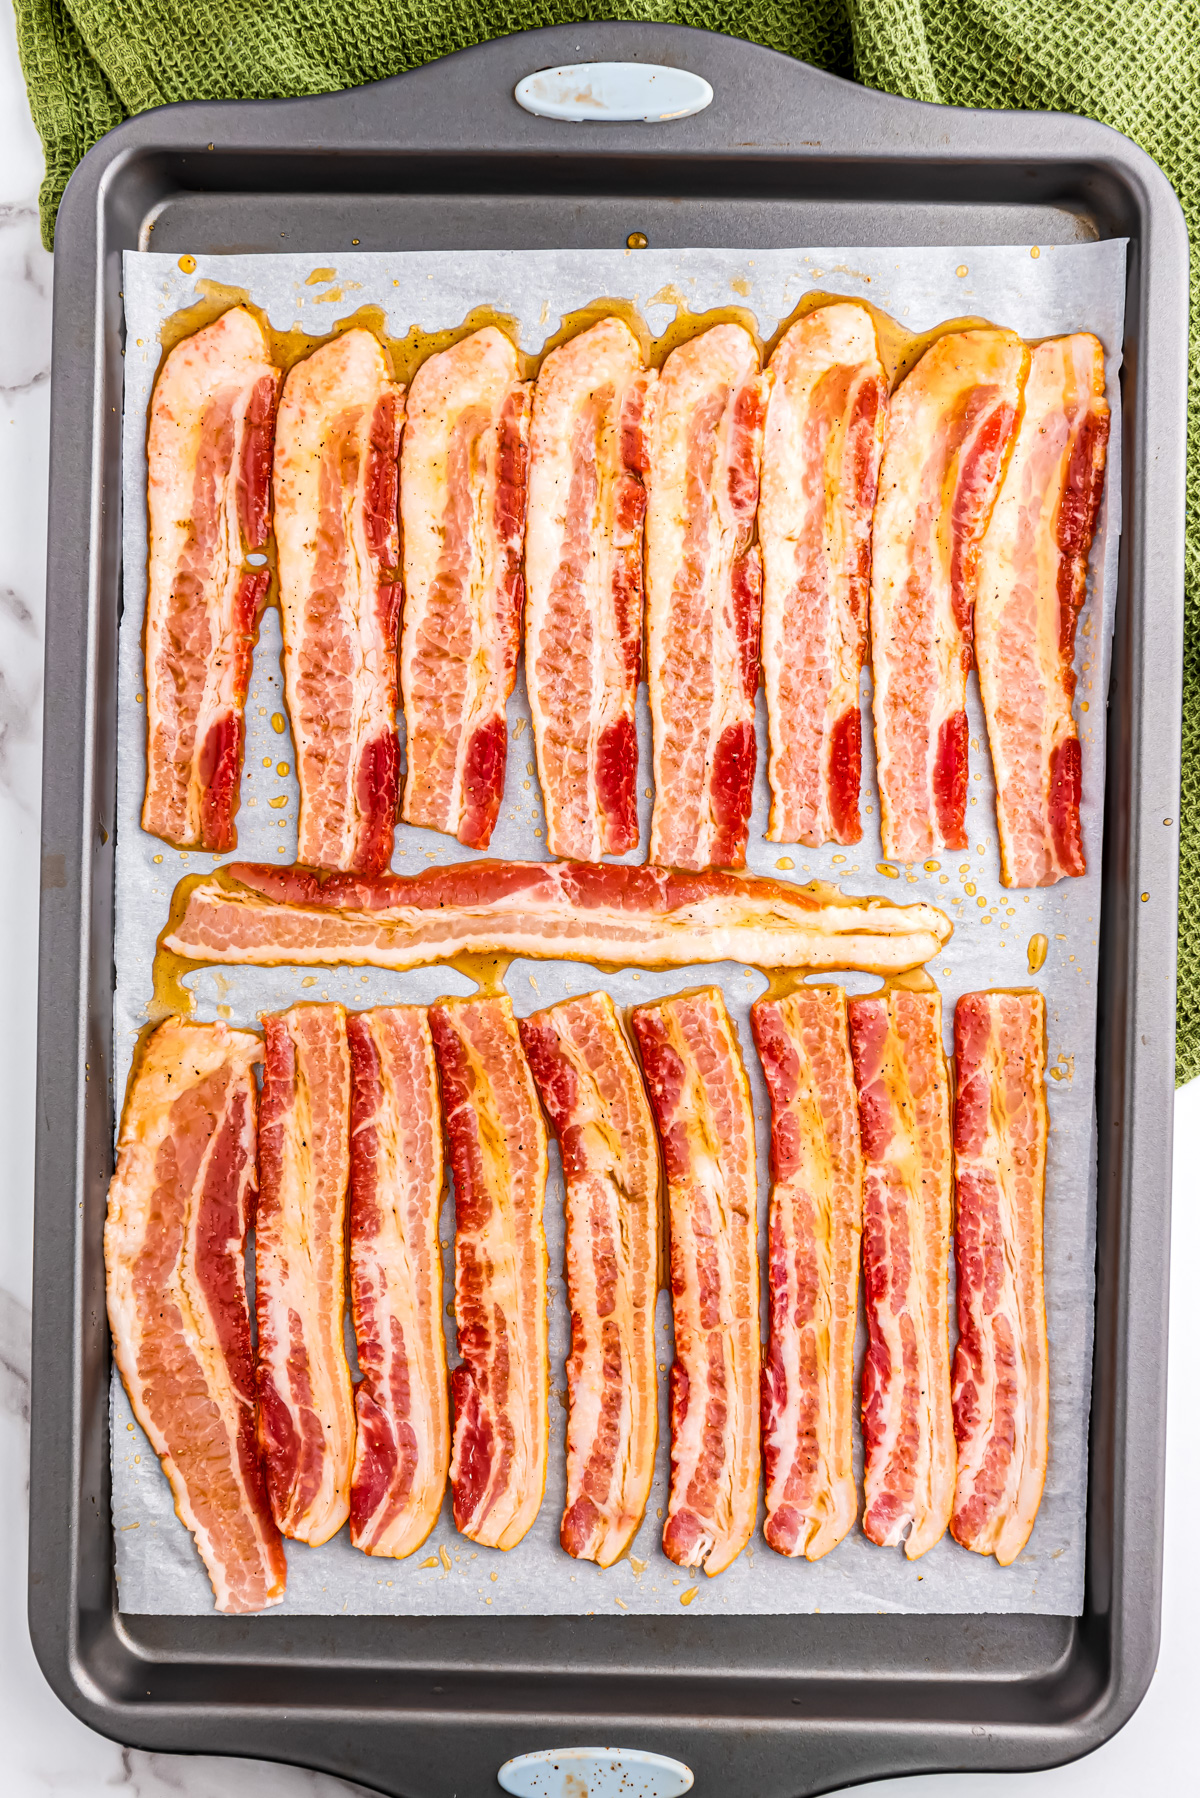 The bacon on a parchment lined tray, covered with maple glaze, waiting to be cooked in the oven.